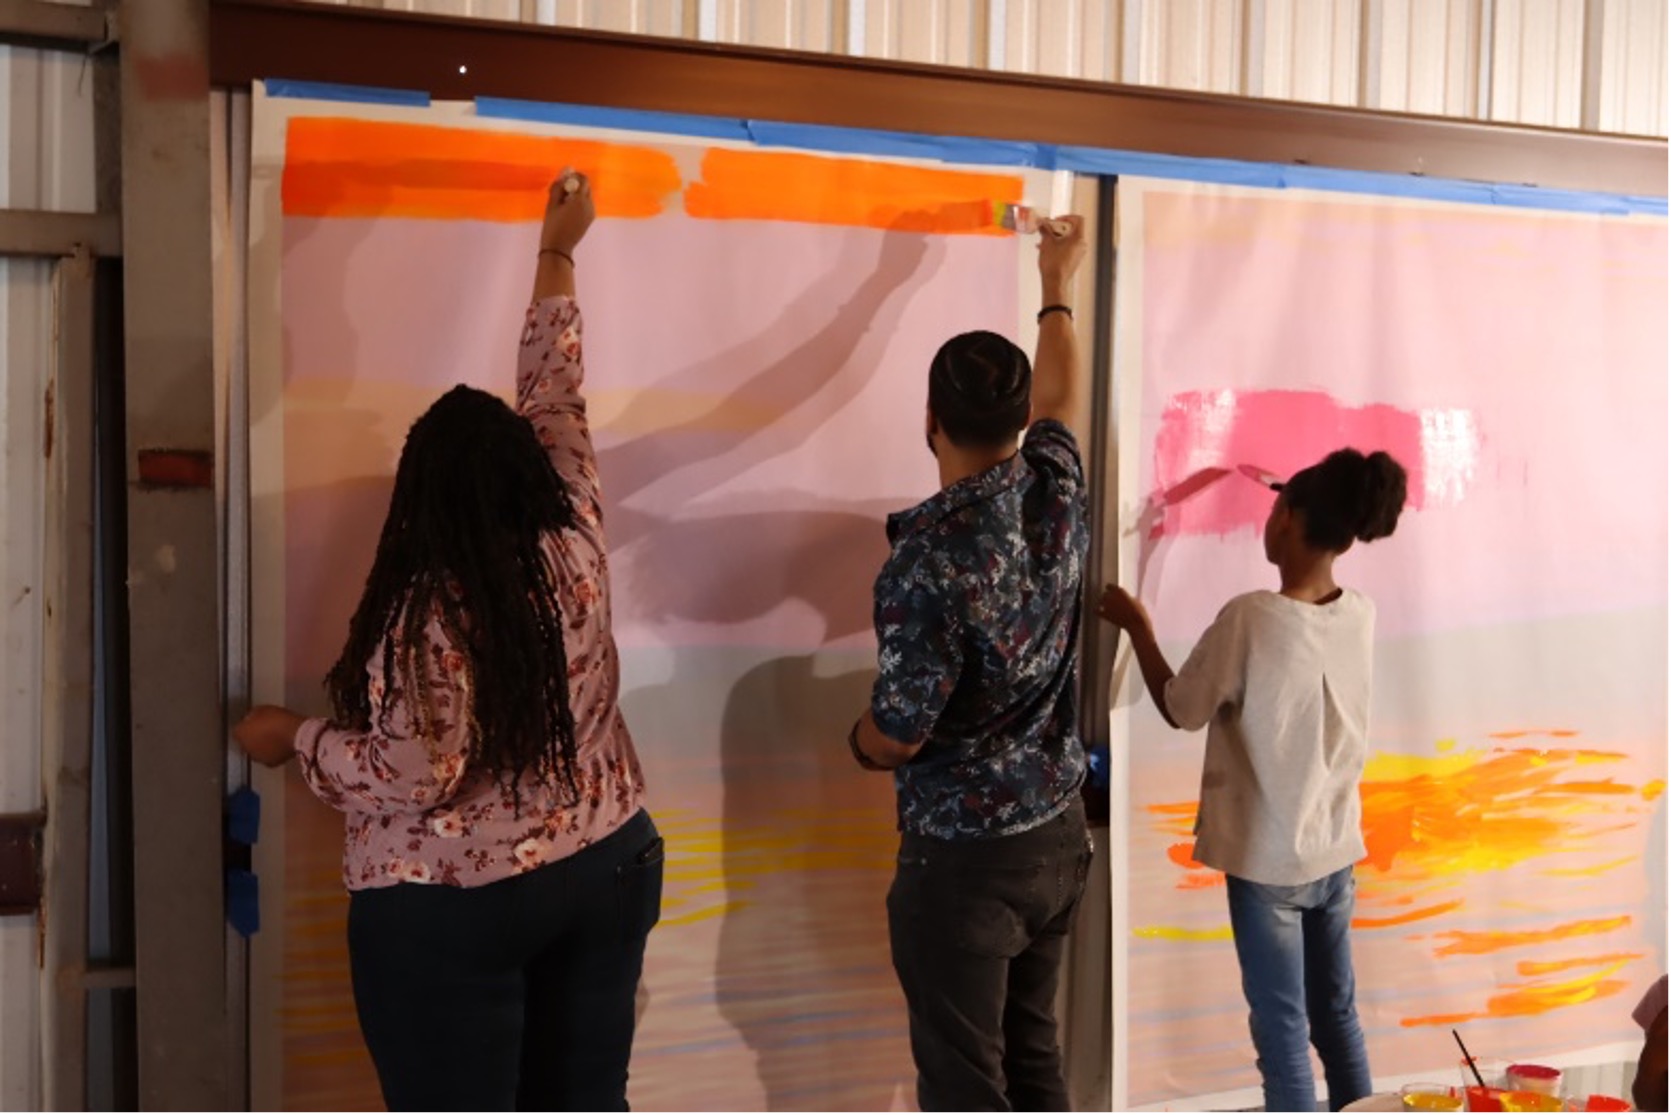 Art of Four participants painting a mural